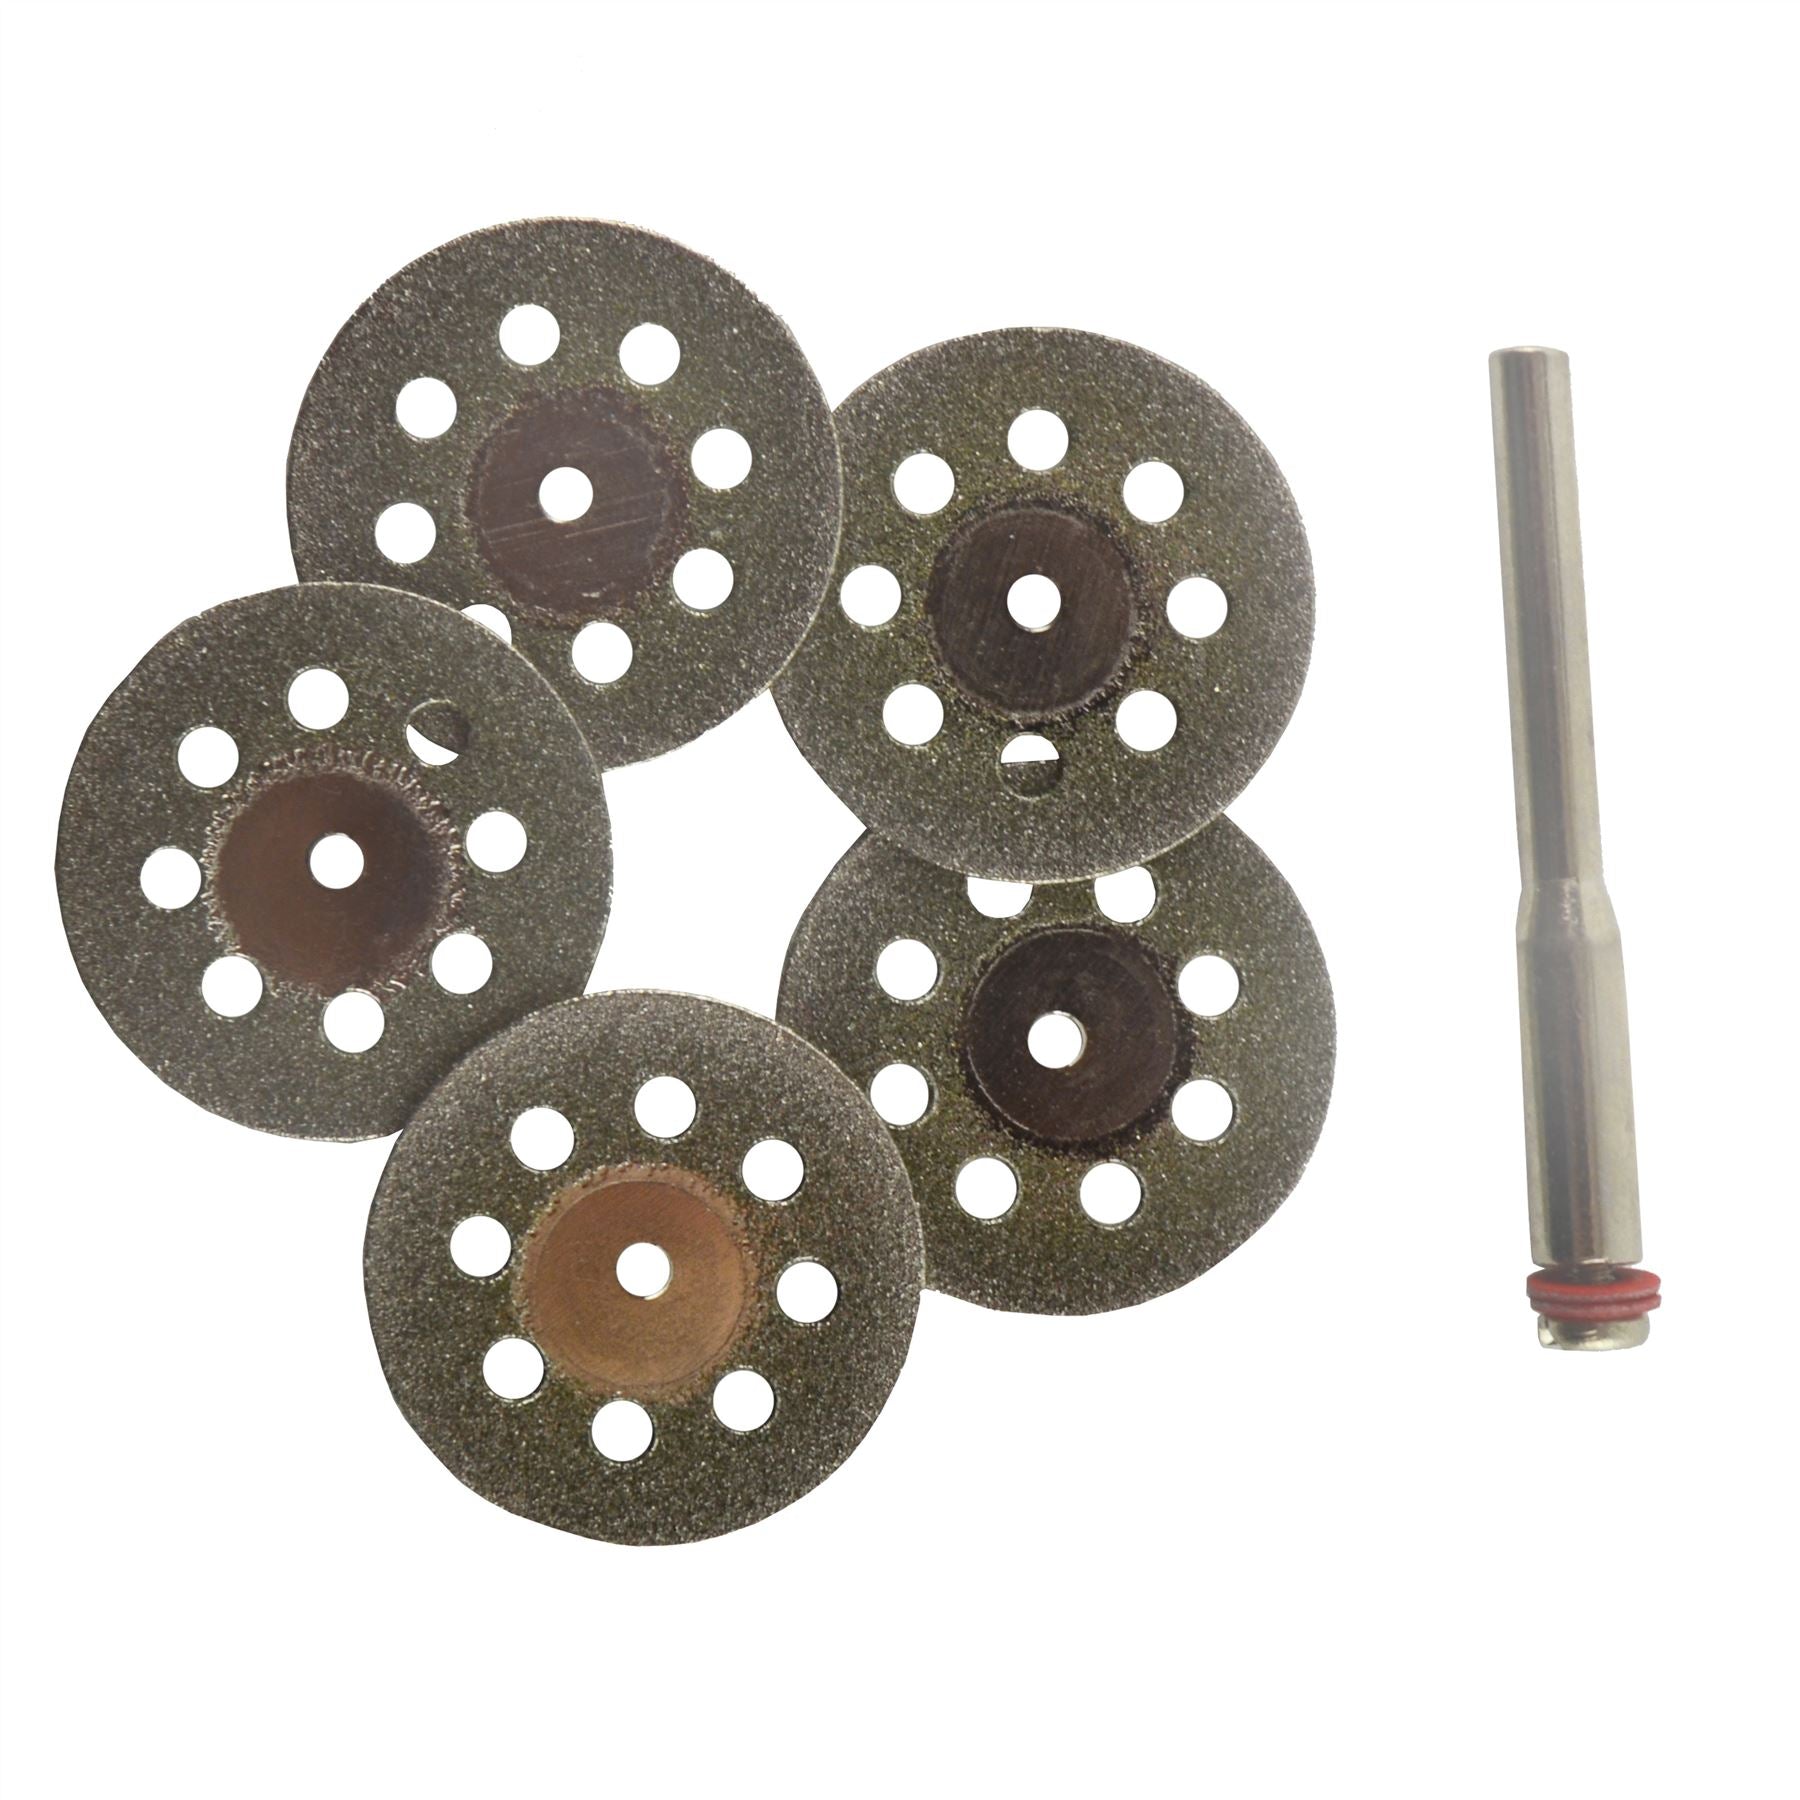 Diamond Tipped And Vented Mini Rotary Cutting Discs Cut Off Disc For Dremel 5pc